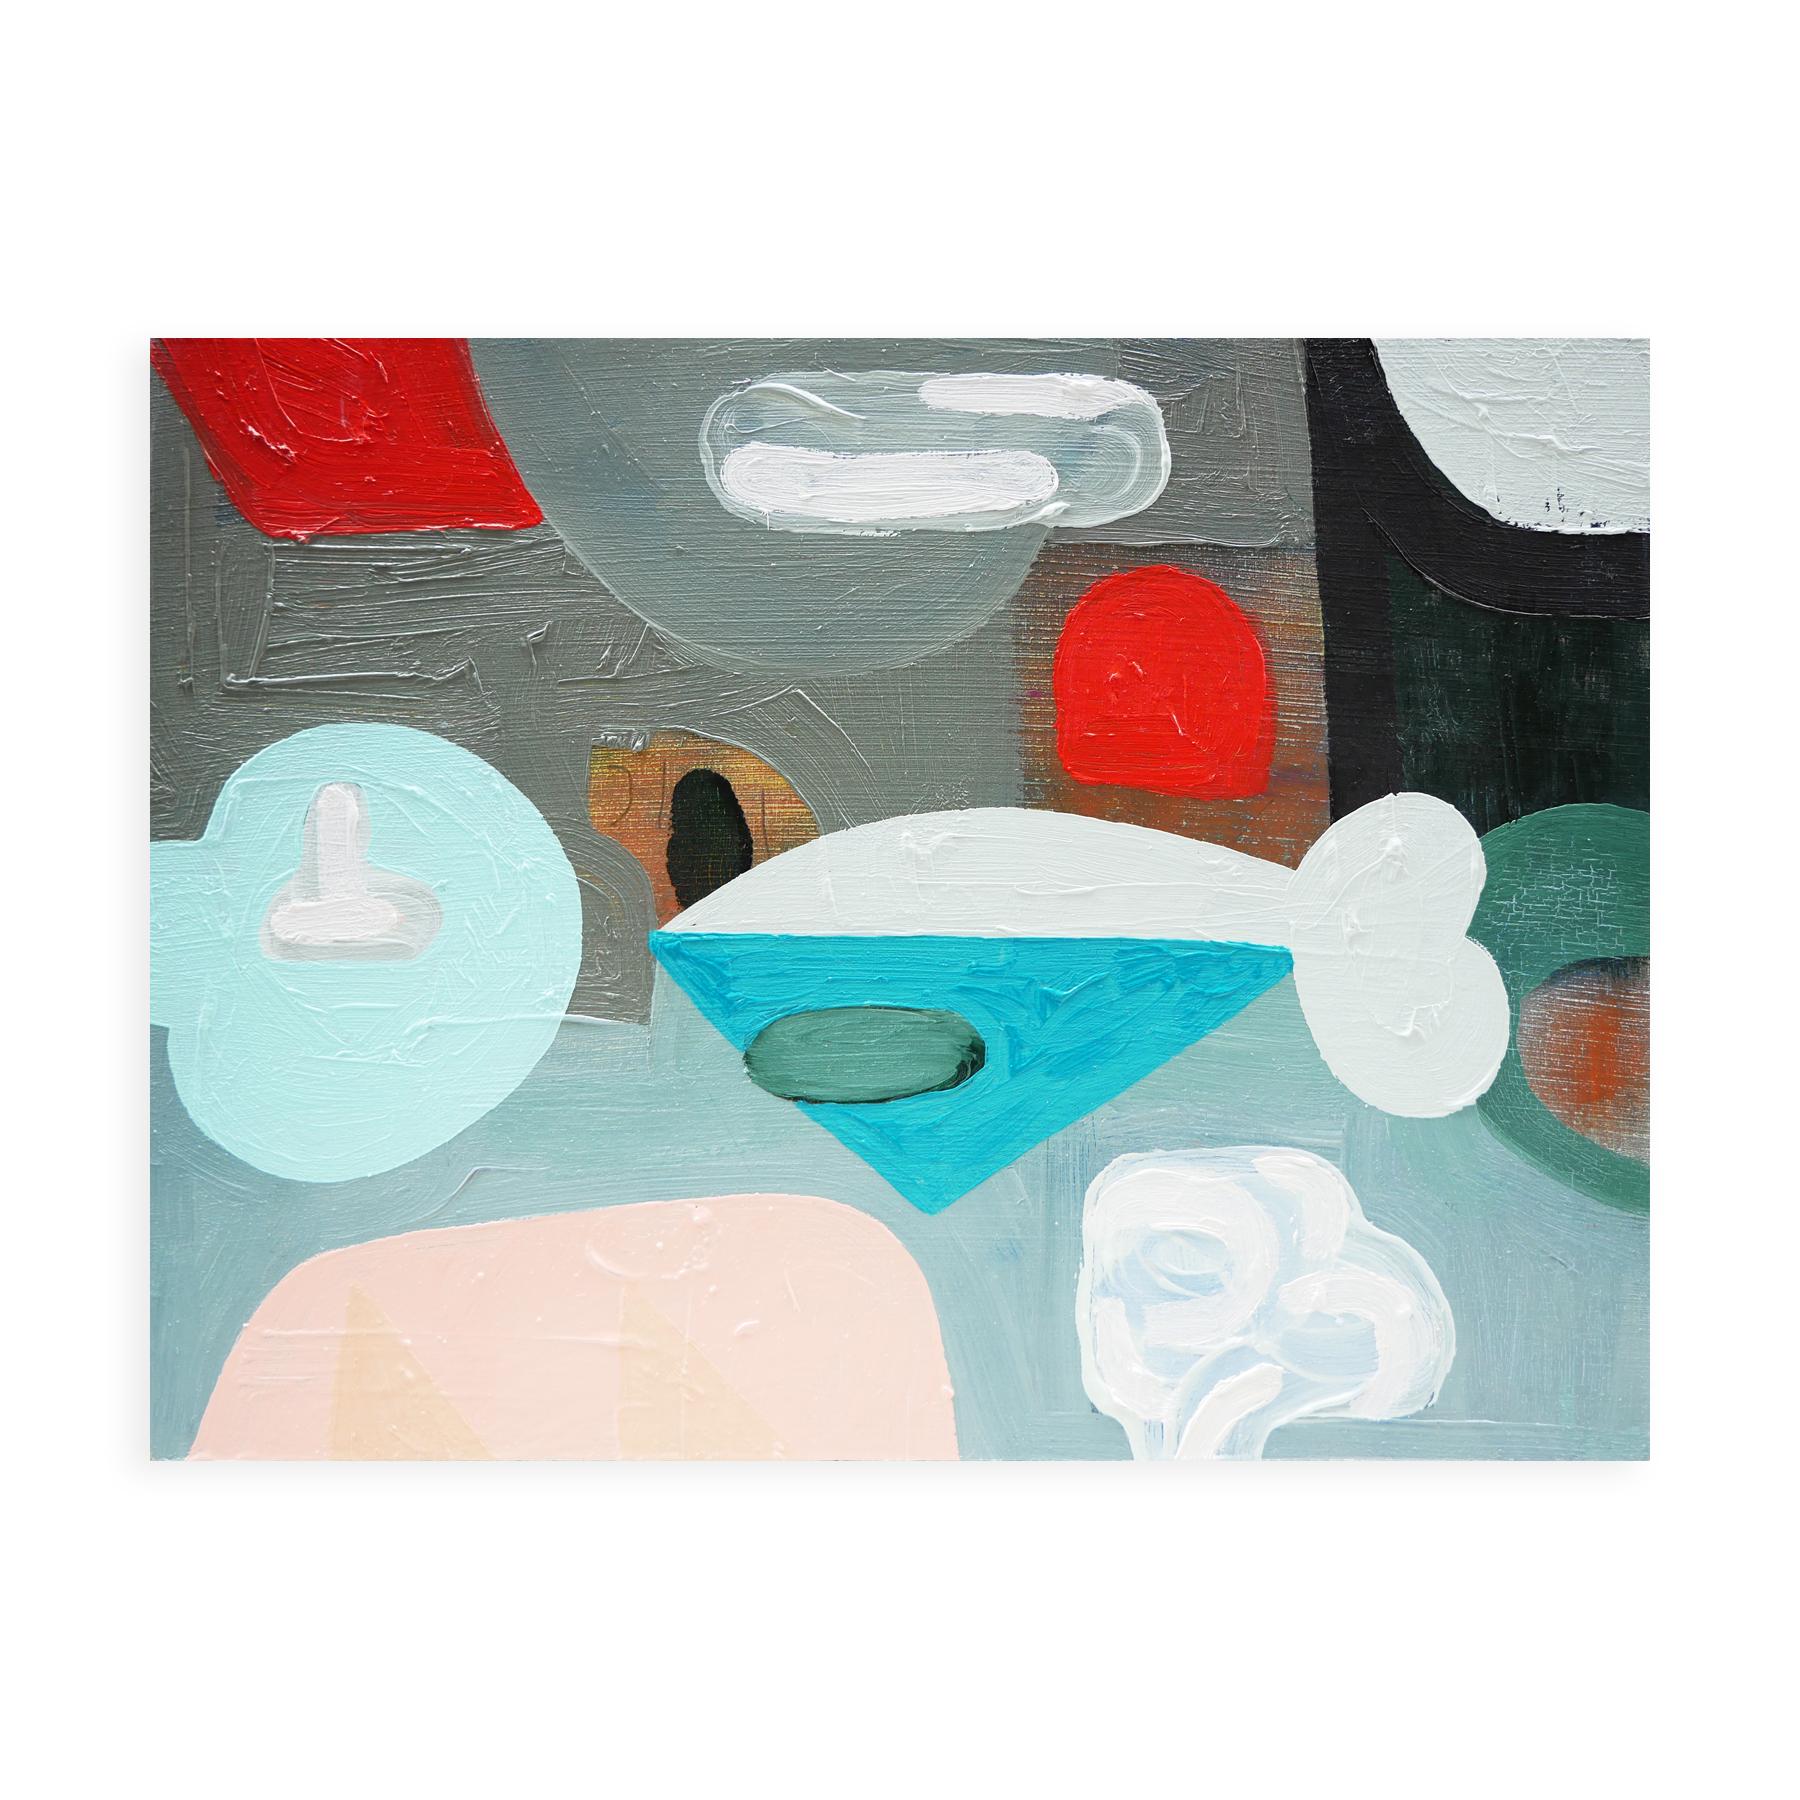 Pink, sky blue, gray, and red abstract contemporary painting by Houston, TX artist Peter Healy. The painting depicts geometric shapes that resemble a vehicle flying through the clouds. Signed and dated by the artist at the back. Unframed but framing